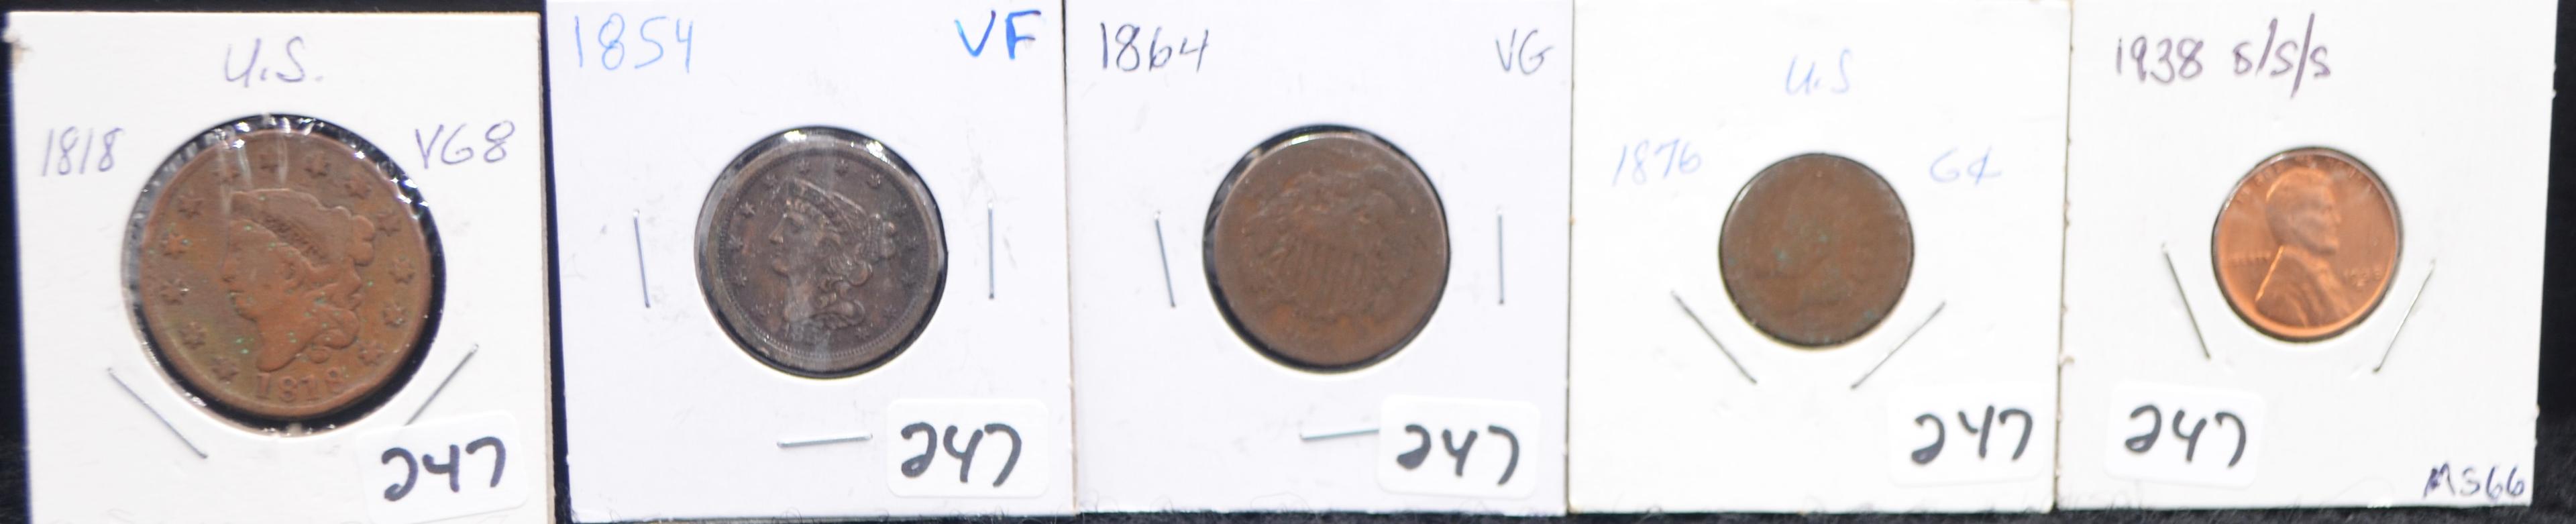 5 COIN COPPER TYPE SET